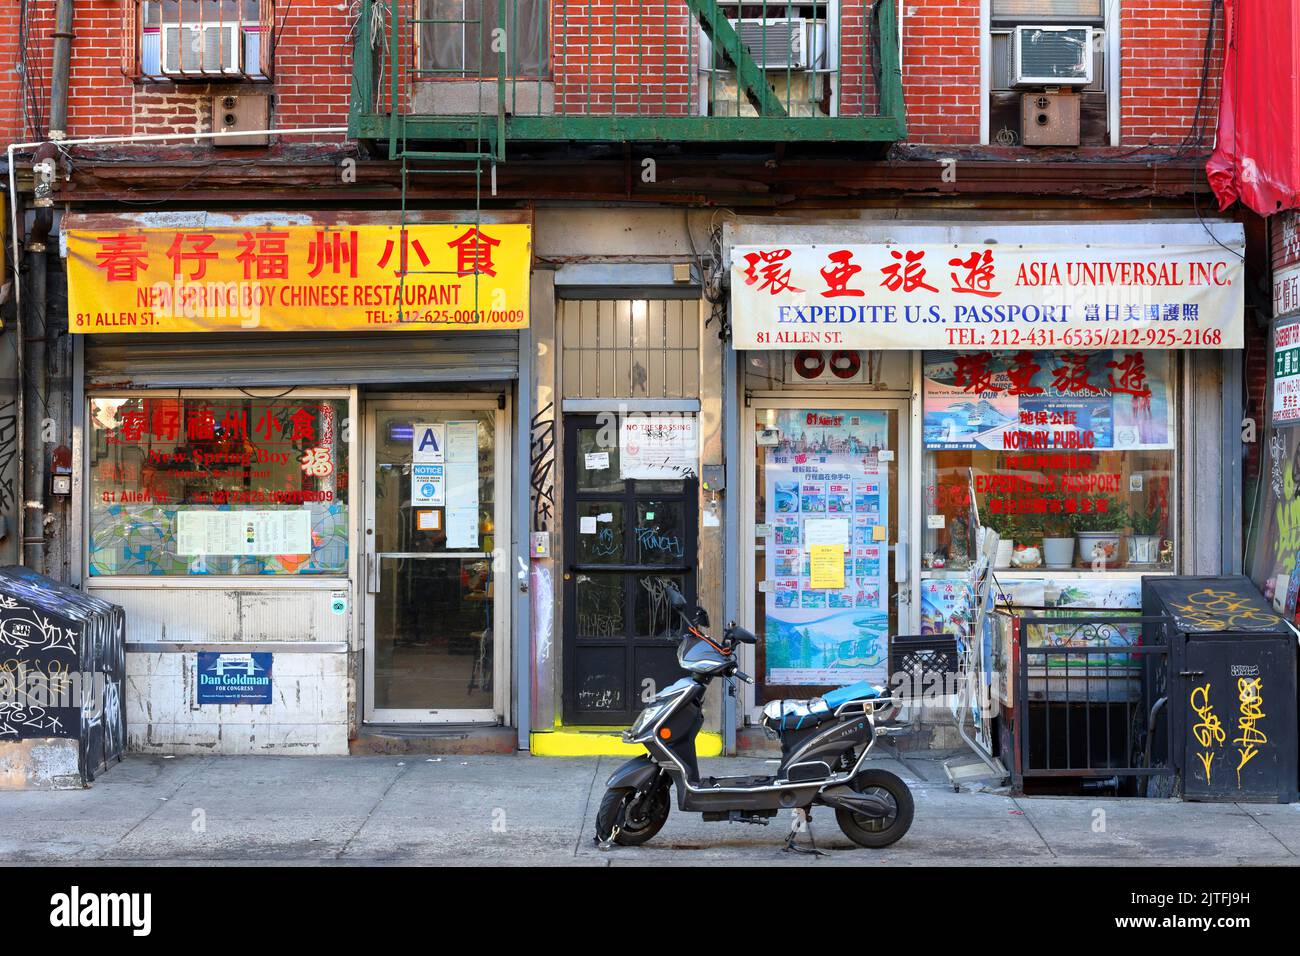 New Spring Boy, Asia Universal, 81 Allen St, New York, NYC storefront photo of a restaurant and a travel agency in Manhattan Chinatown. Stock Photo